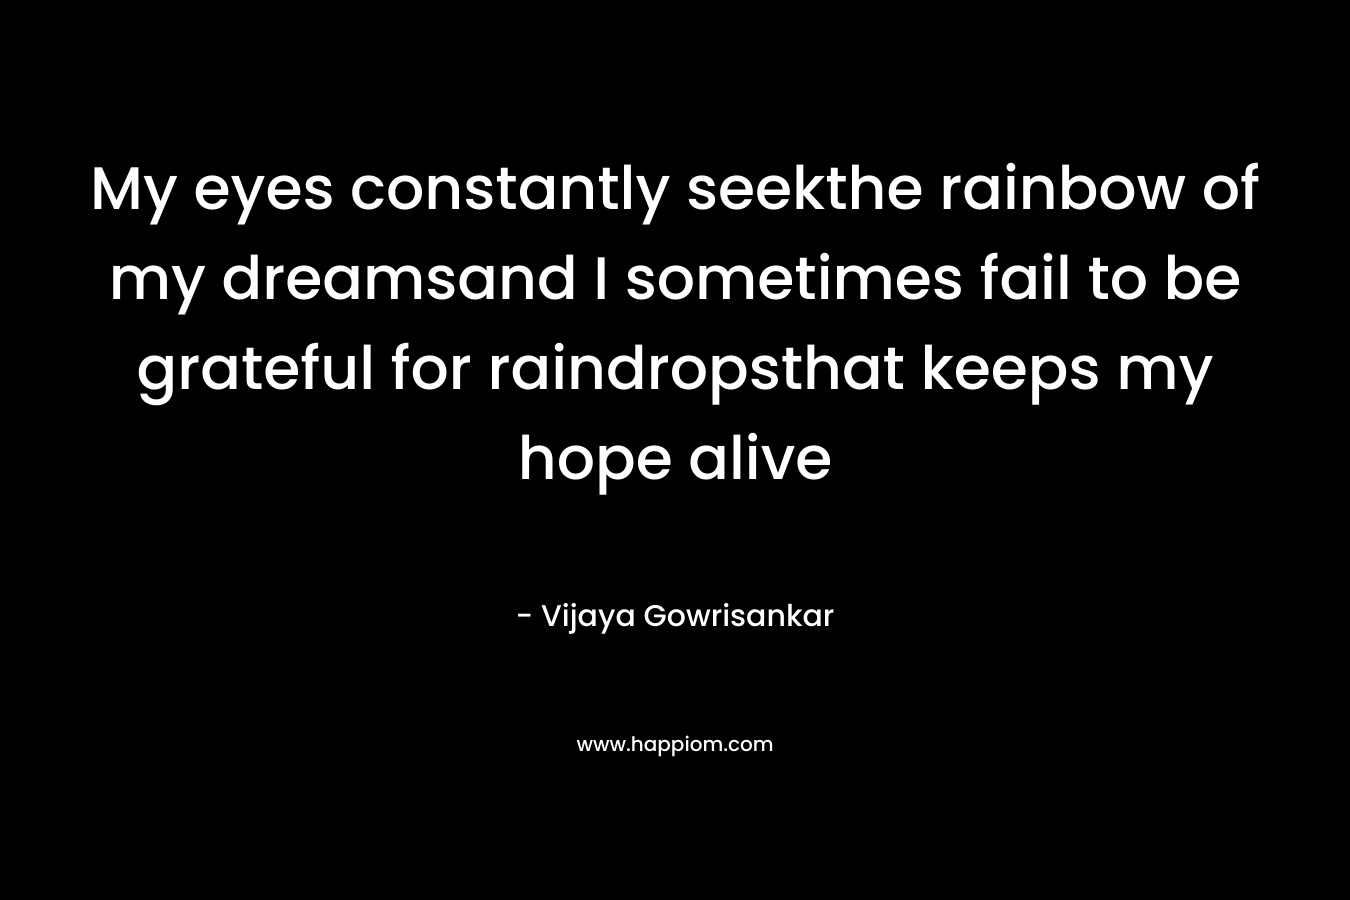 My eyes constantly seekthe rainbow of my dreamsand I sometimes fail to be grateful for raindropsthat keeps my hope alive